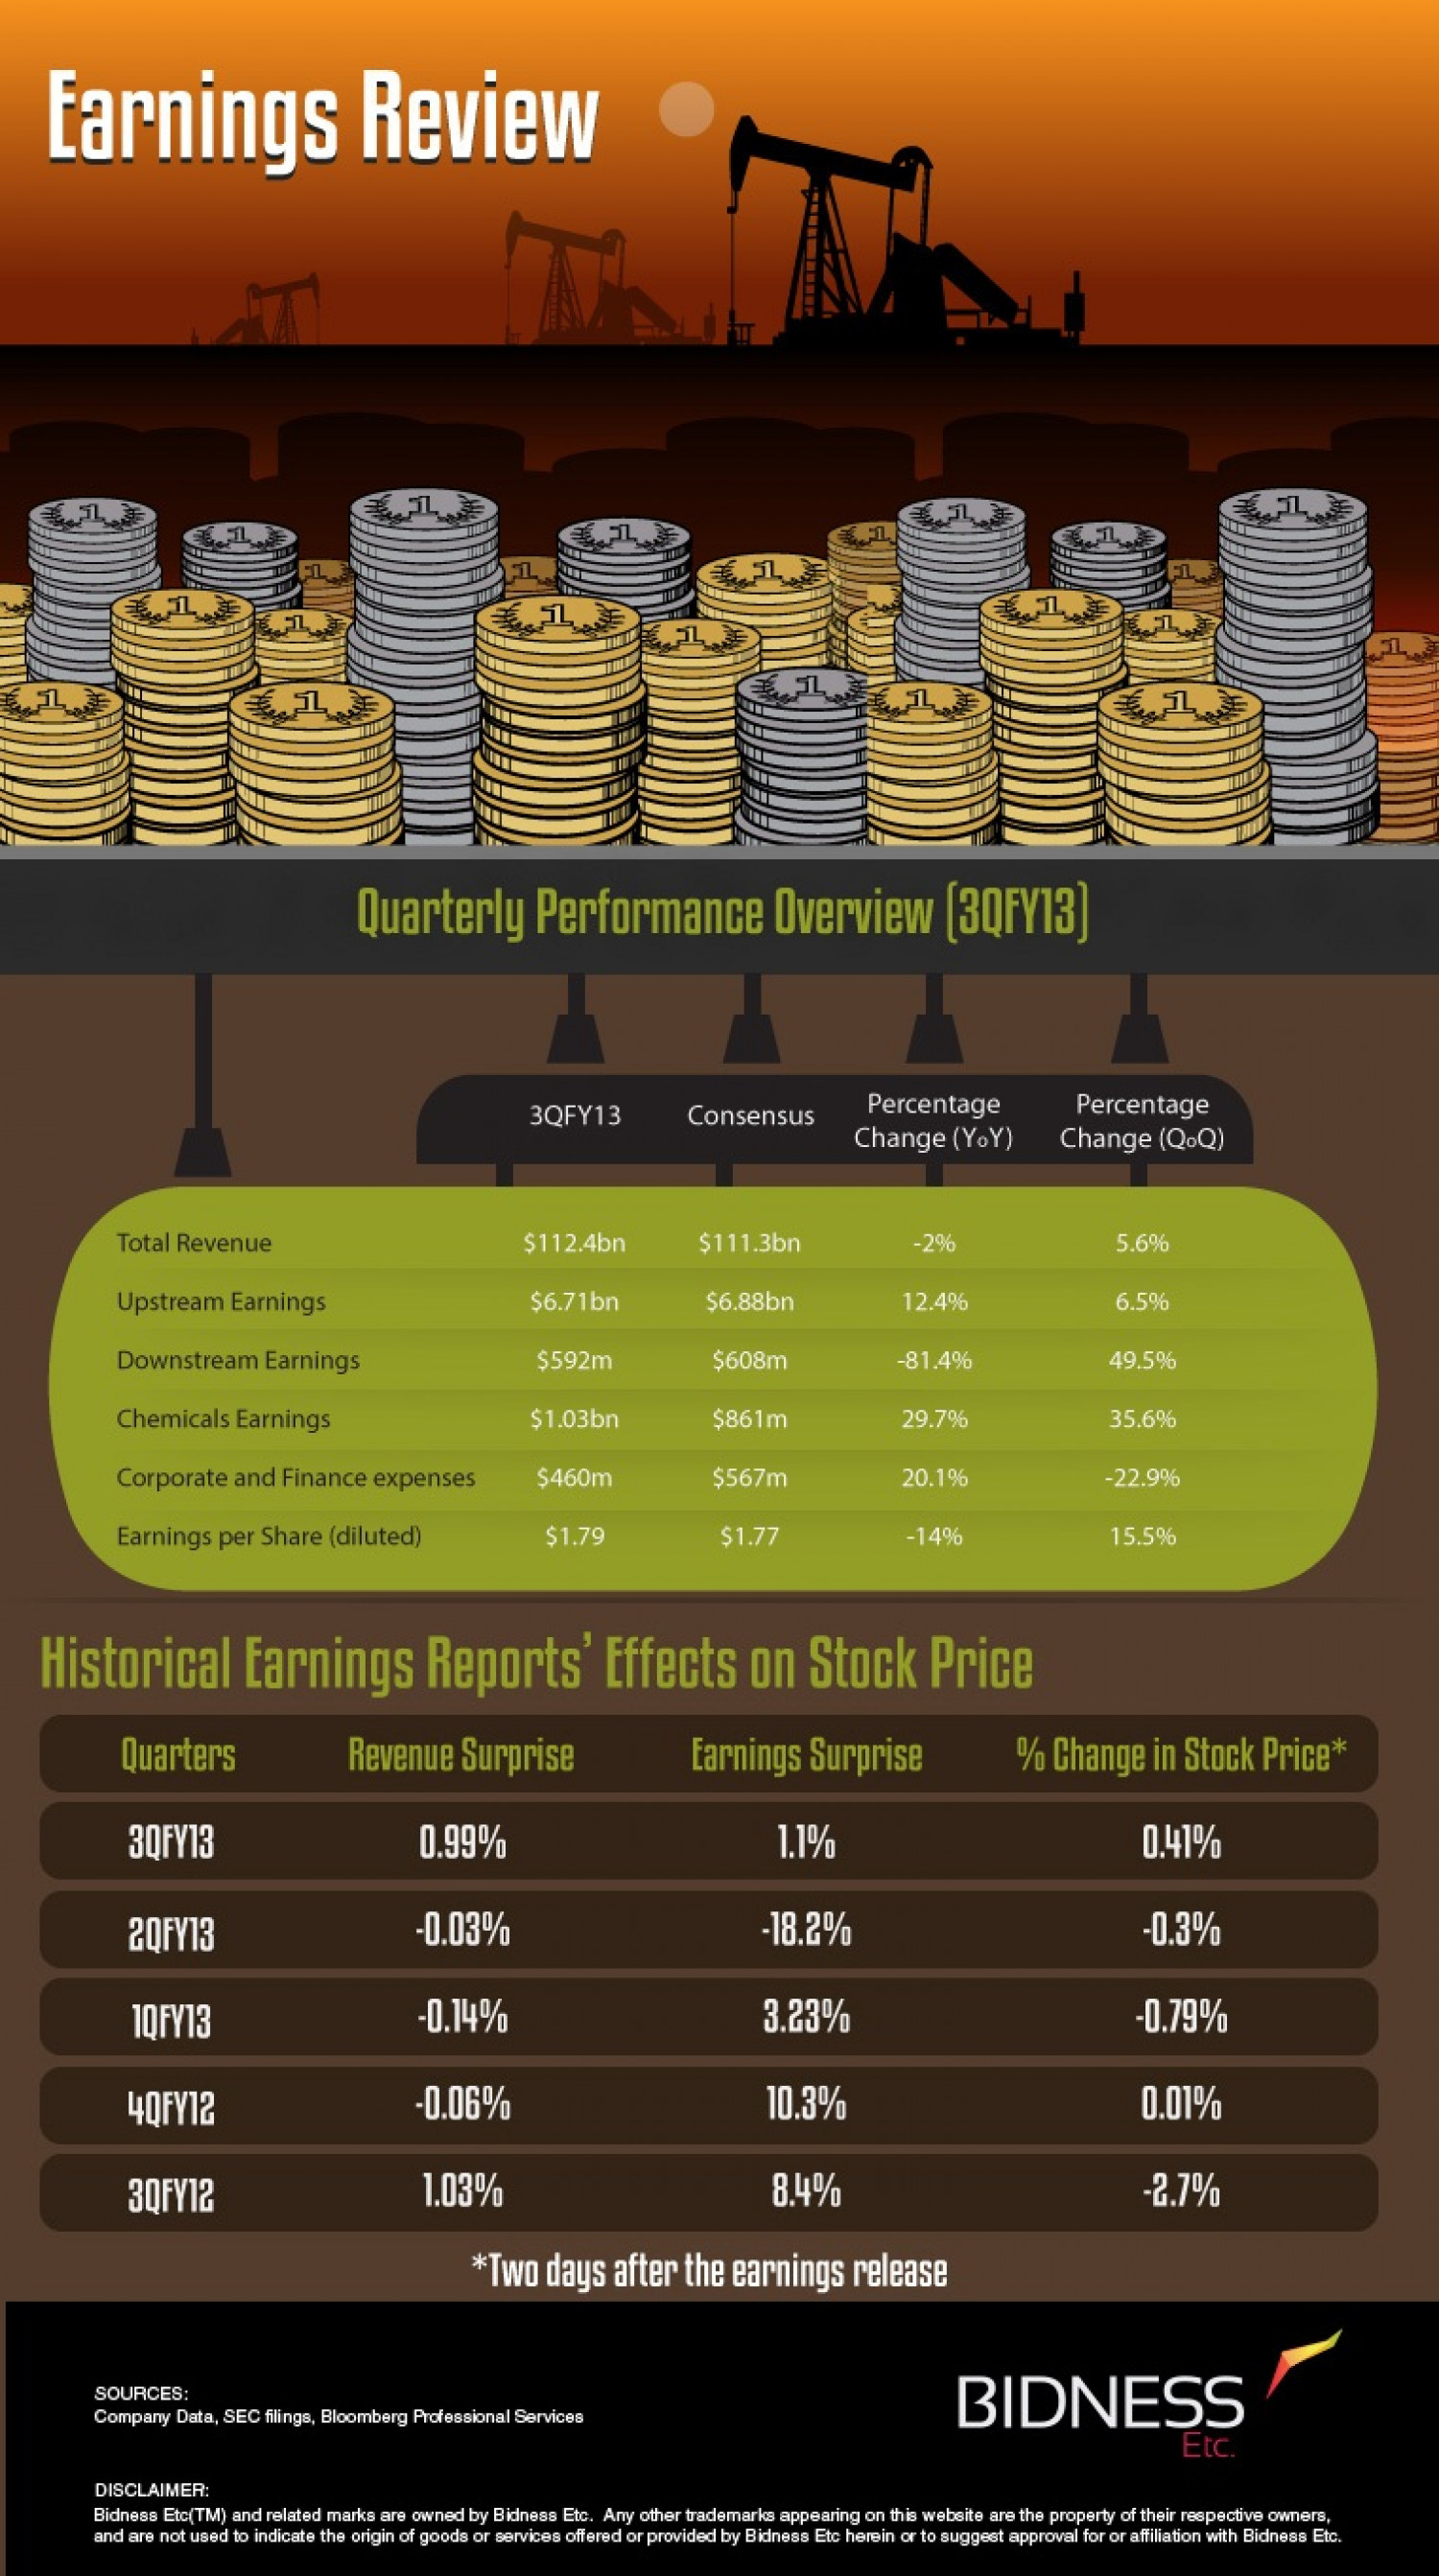 Exxon Earnings Review Infographic